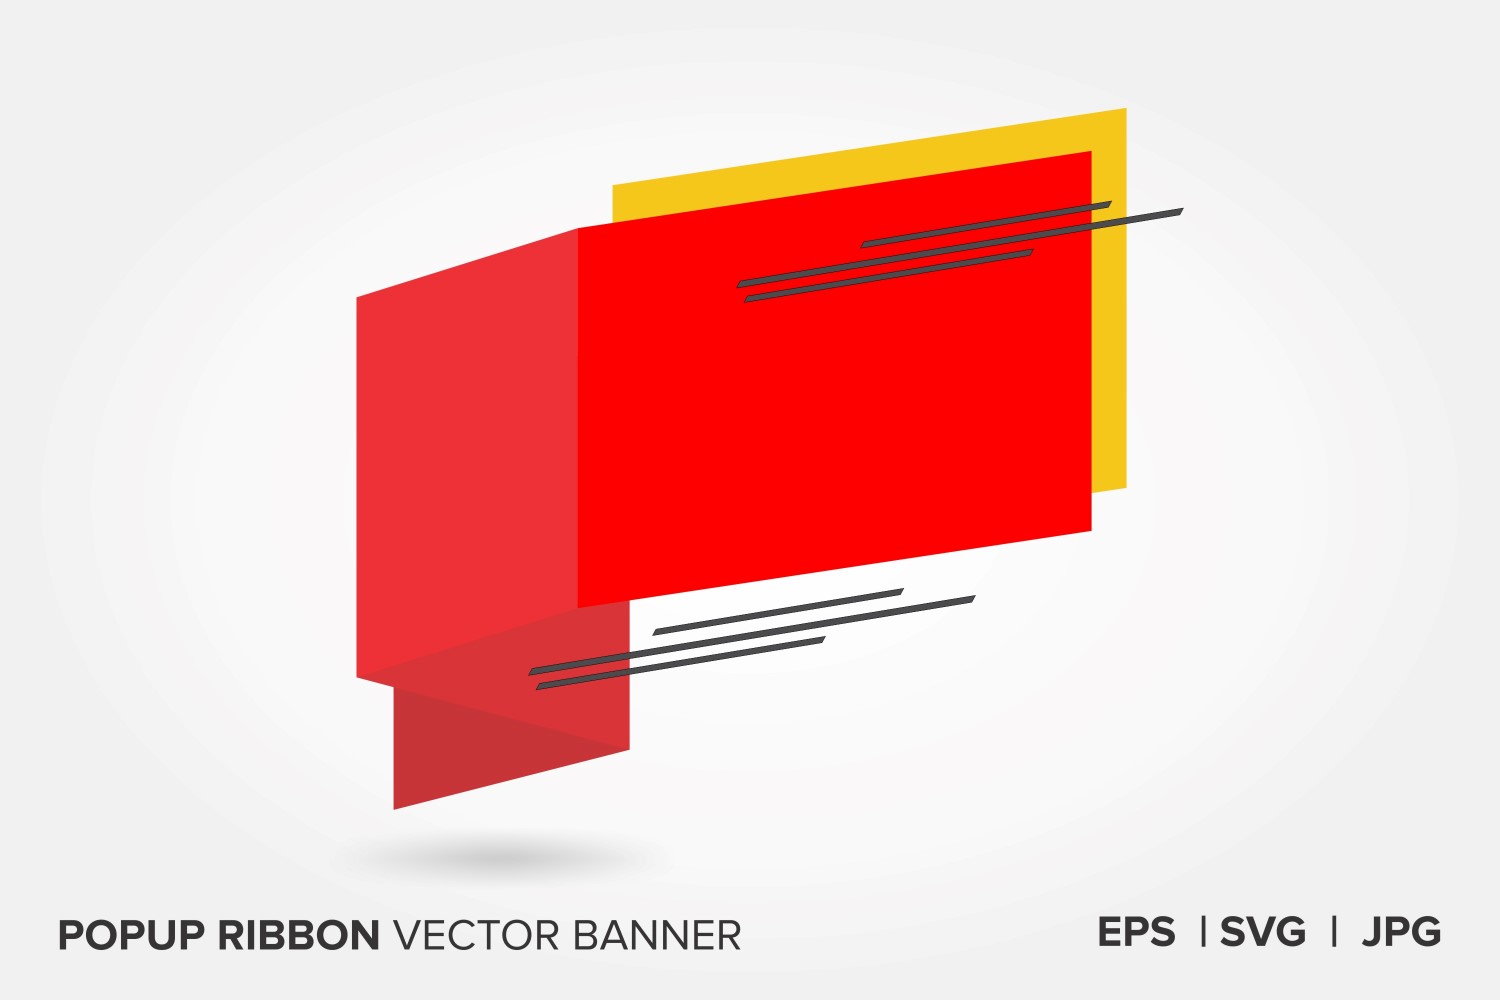 Firebreaks And Yellow Color Popup Ribbon Vector Banner